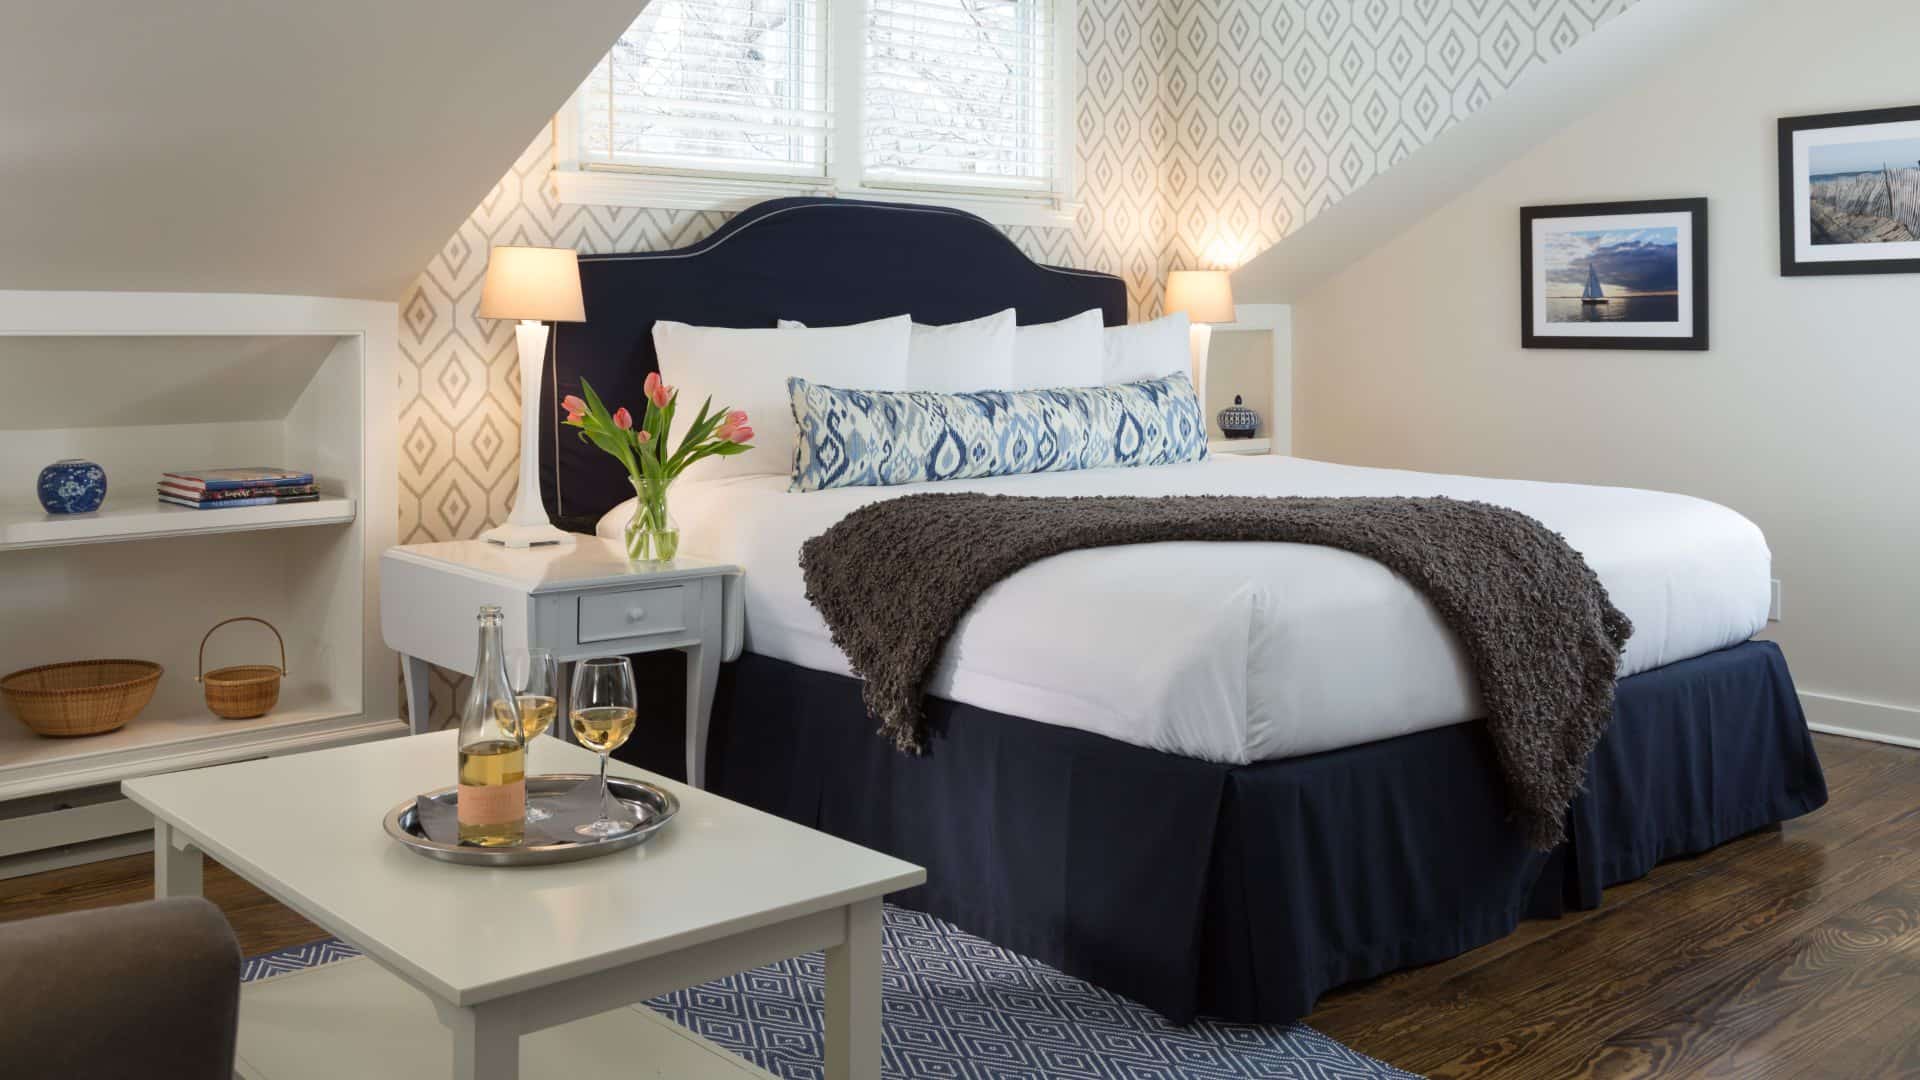 Bedroom with wooden flooring, light colored walls, navy upholstered headboard, white bedding, and sitting area